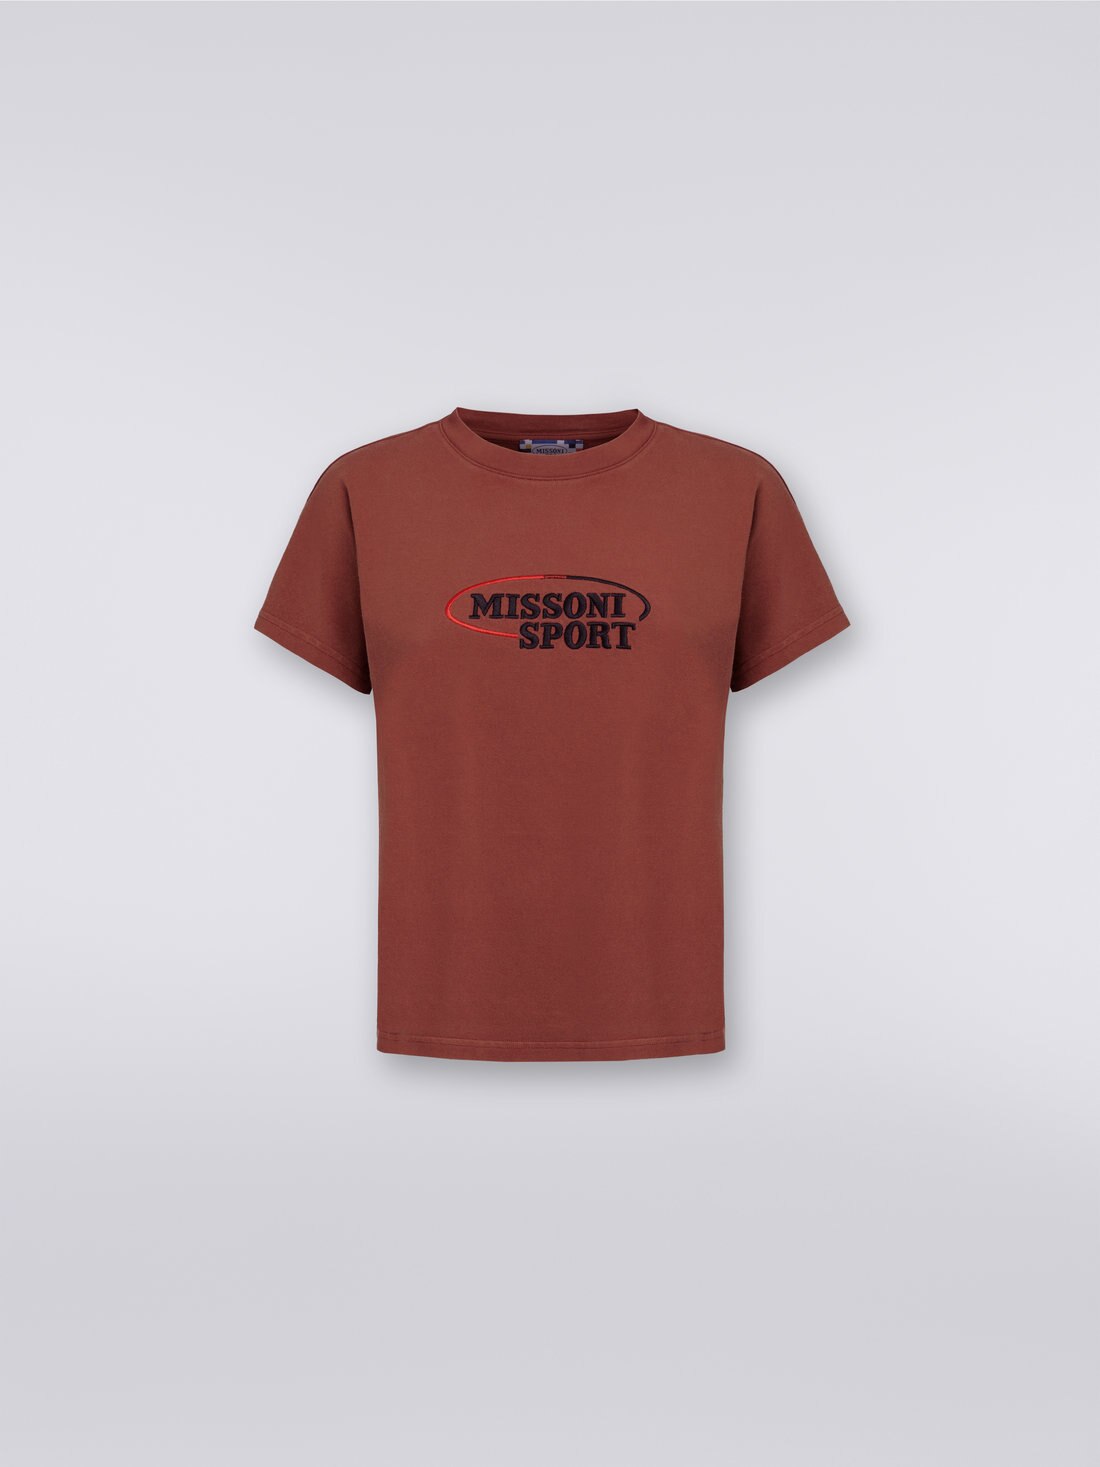 Cotton jersey T-shirt with embroidered logo, Rust - SS23WL01BJ00GYS80B7 - 0